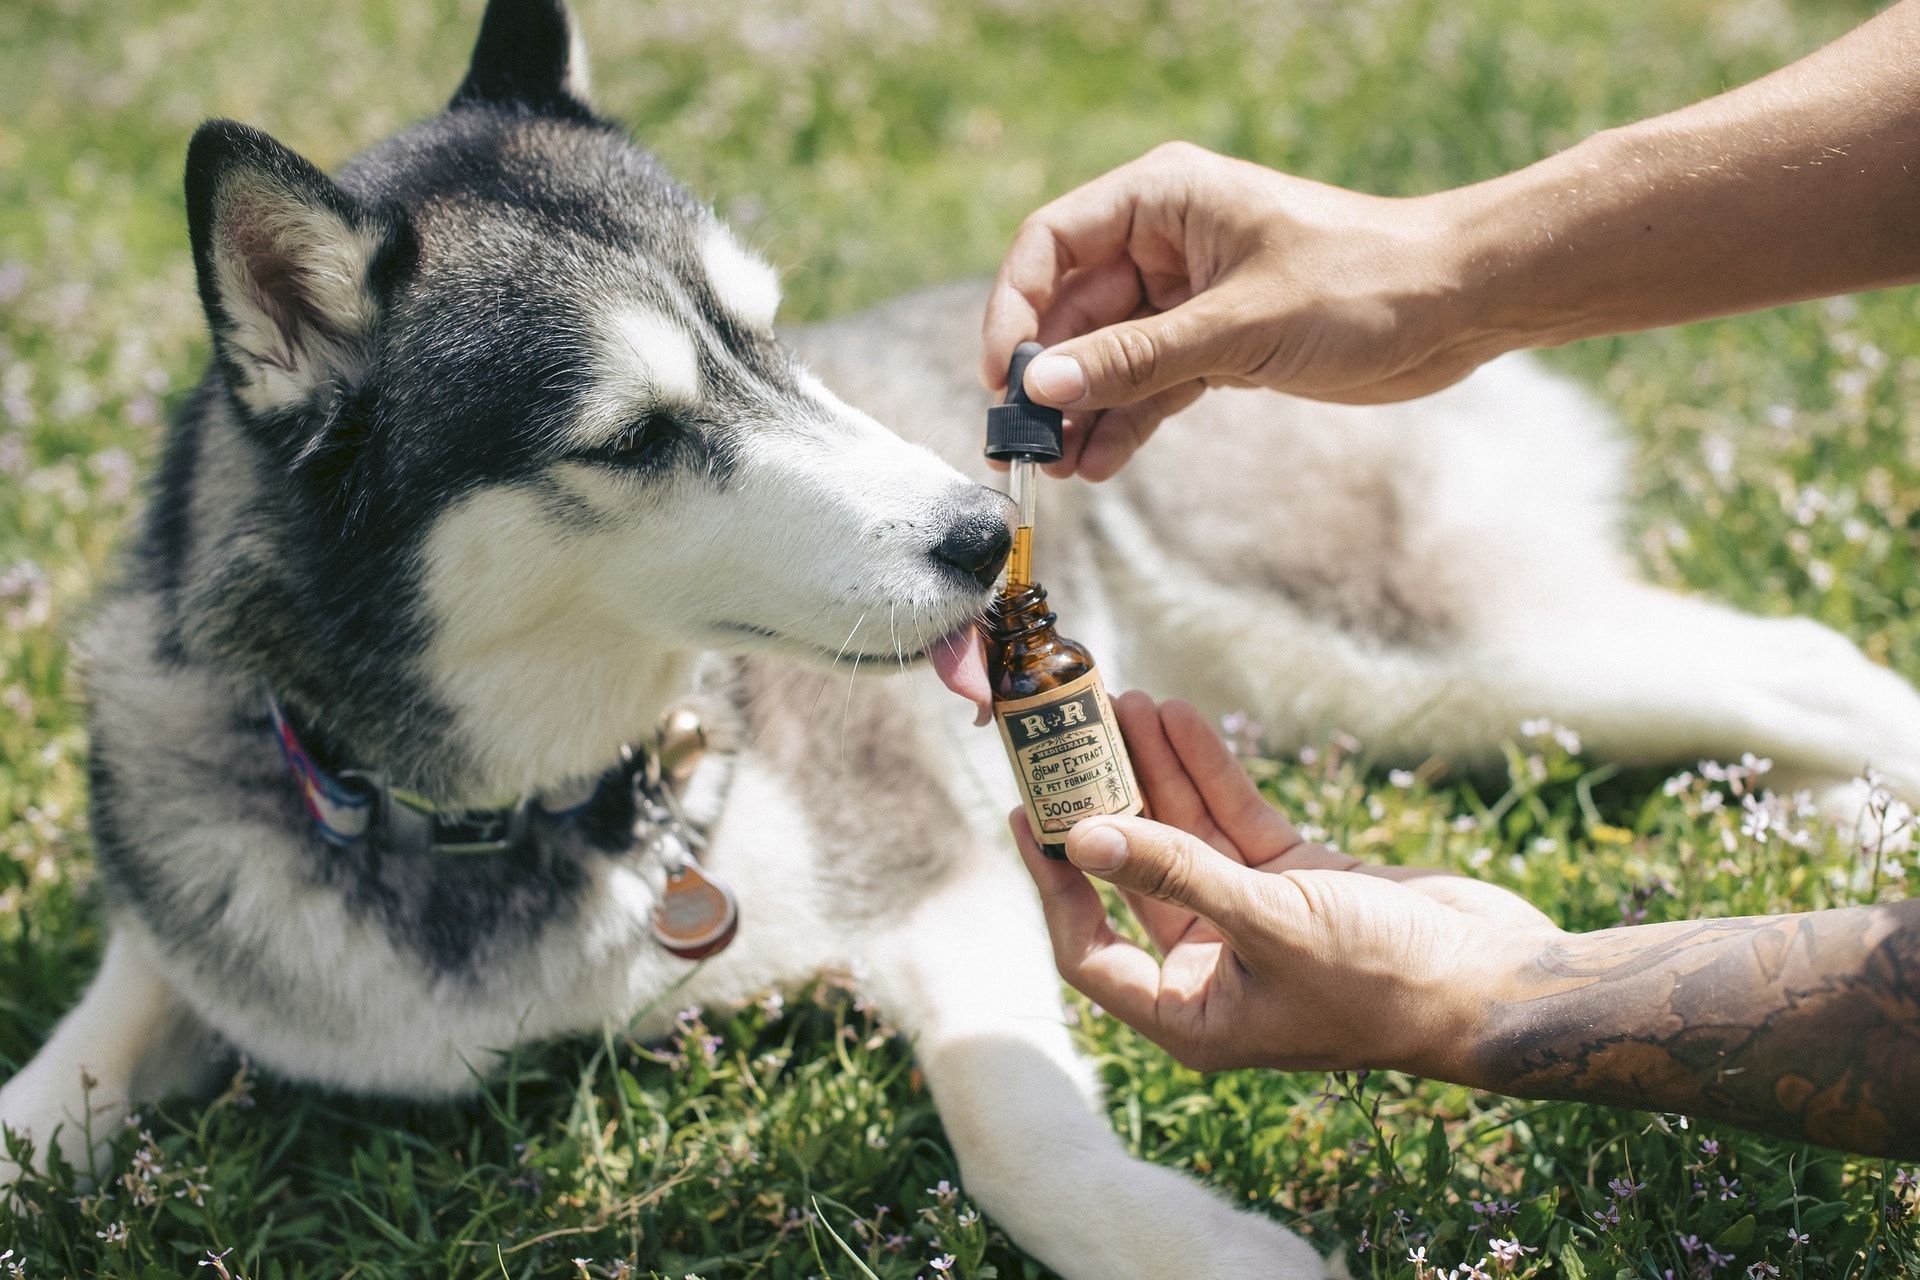 CBD Oil for Dogs with Cancer